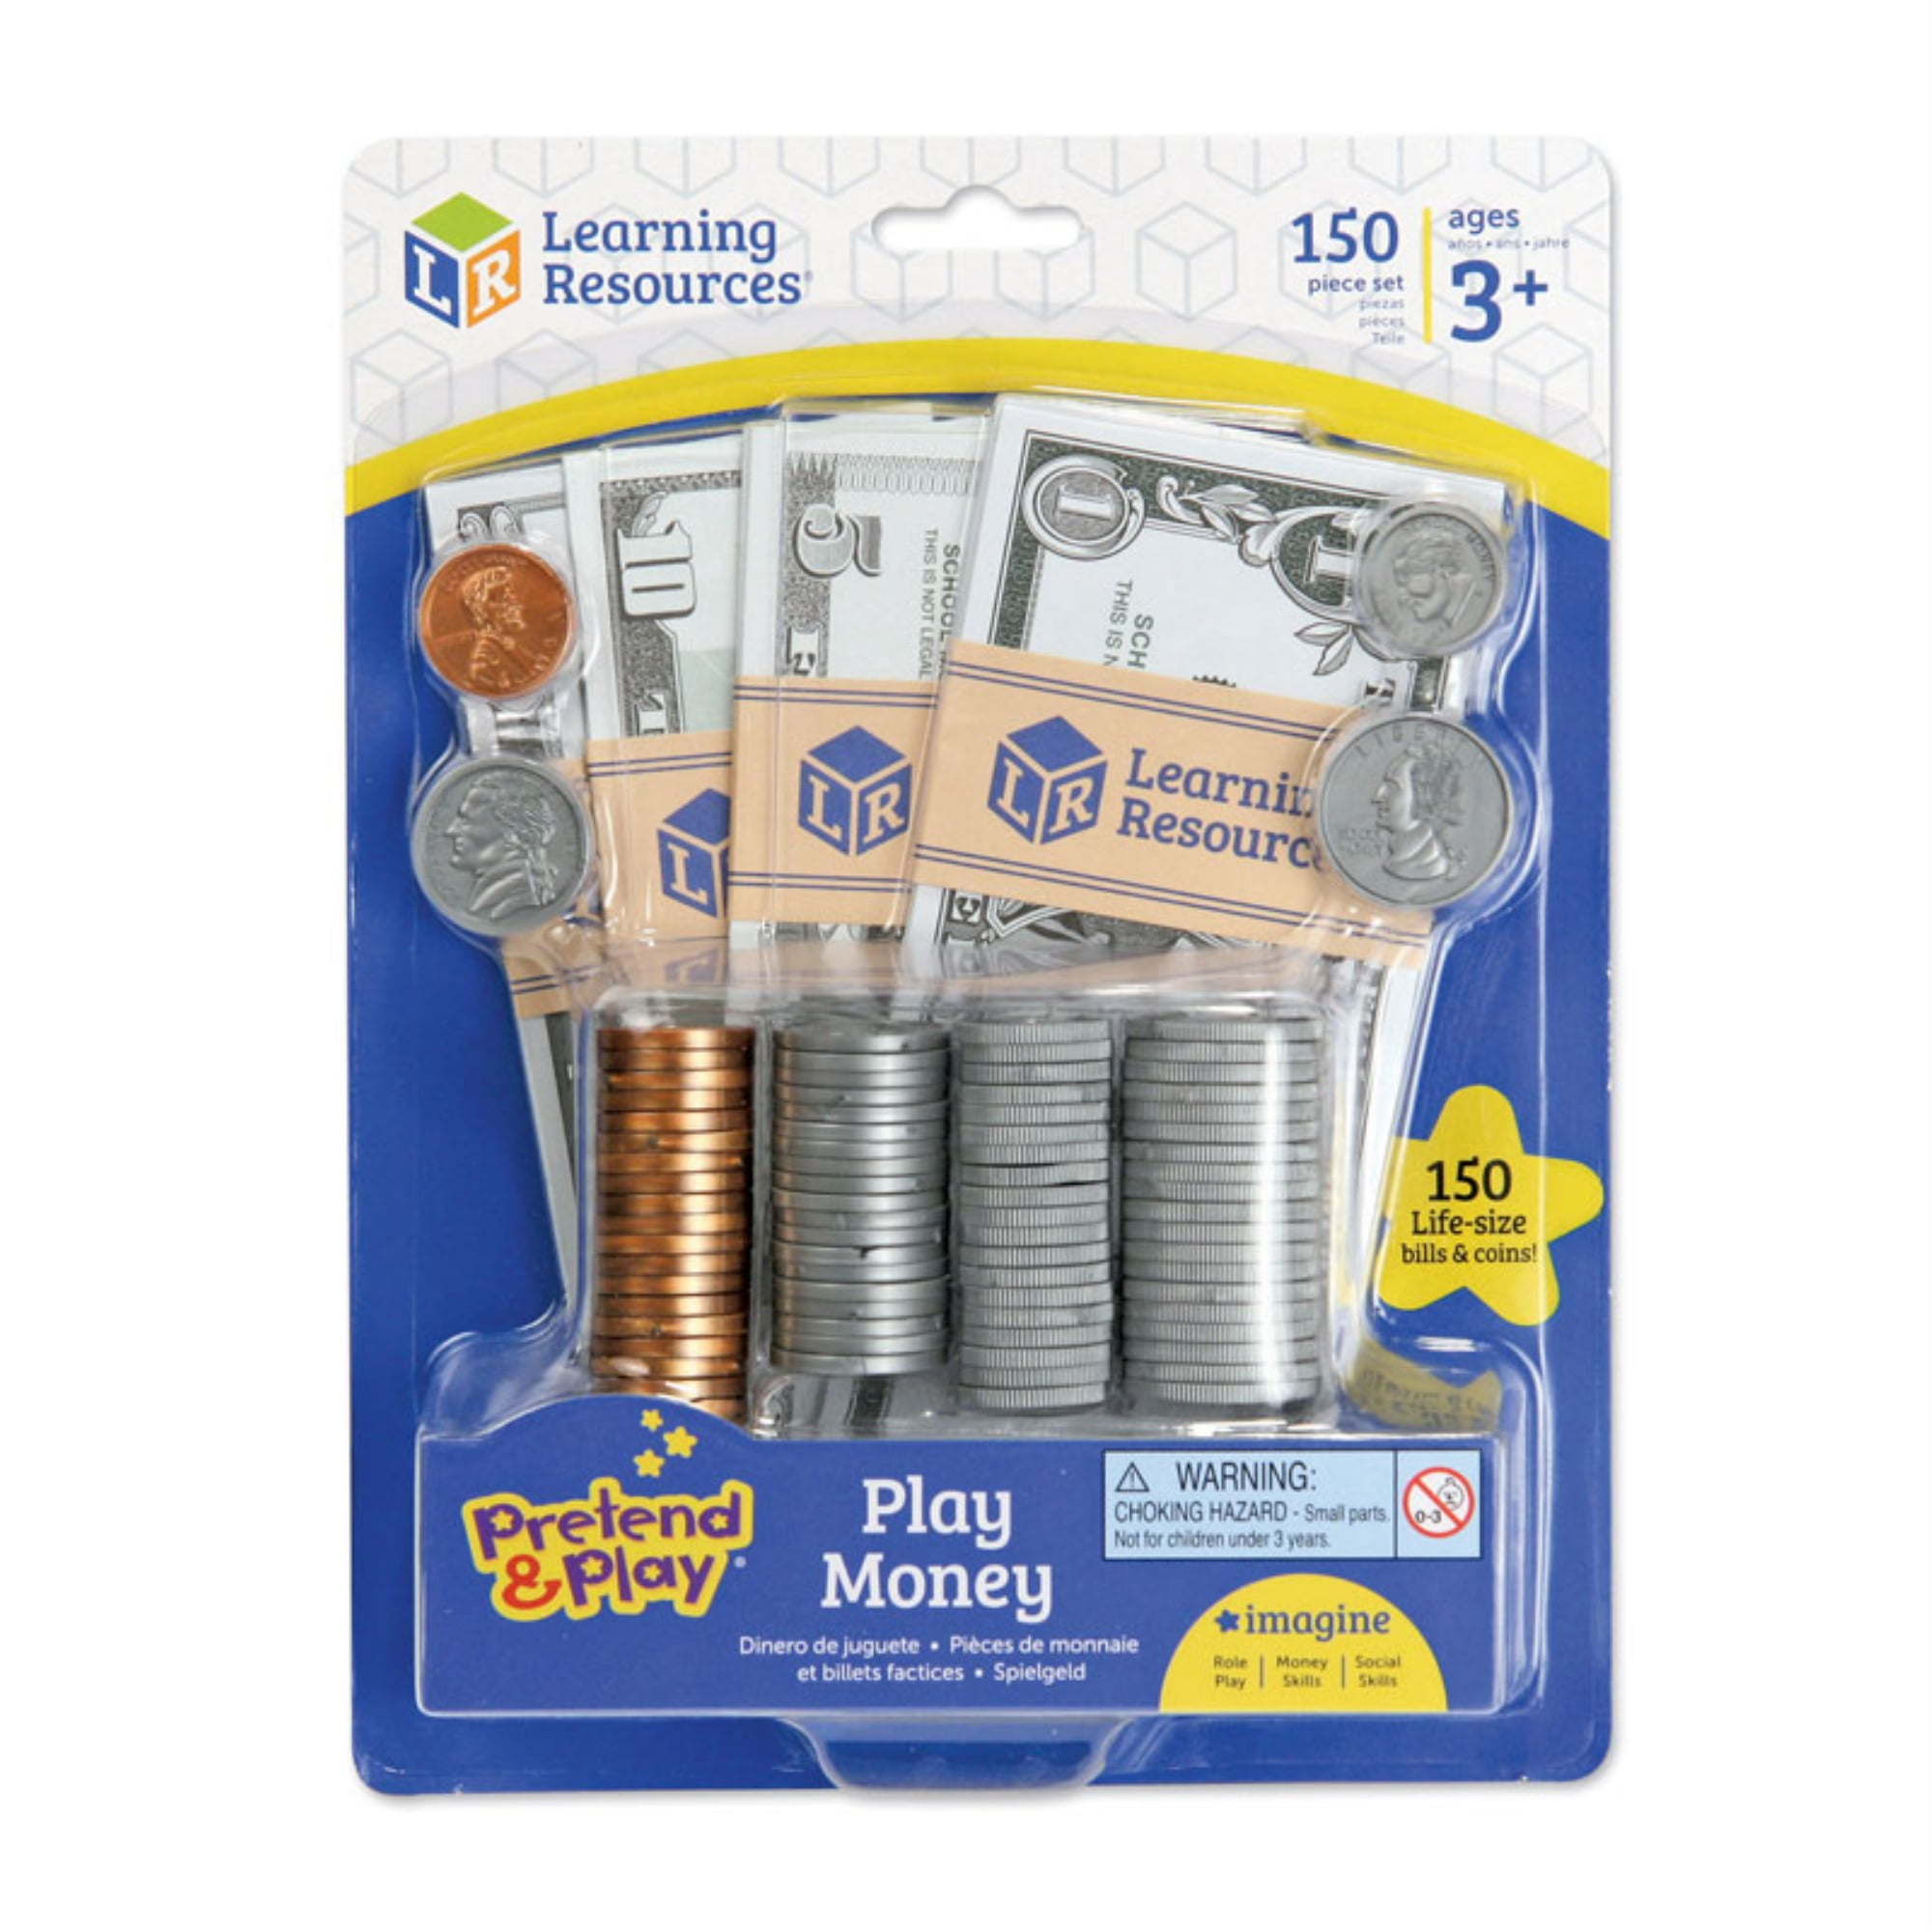 Toy Money Games Education Training Teaching Aid Pounds Party Bag 